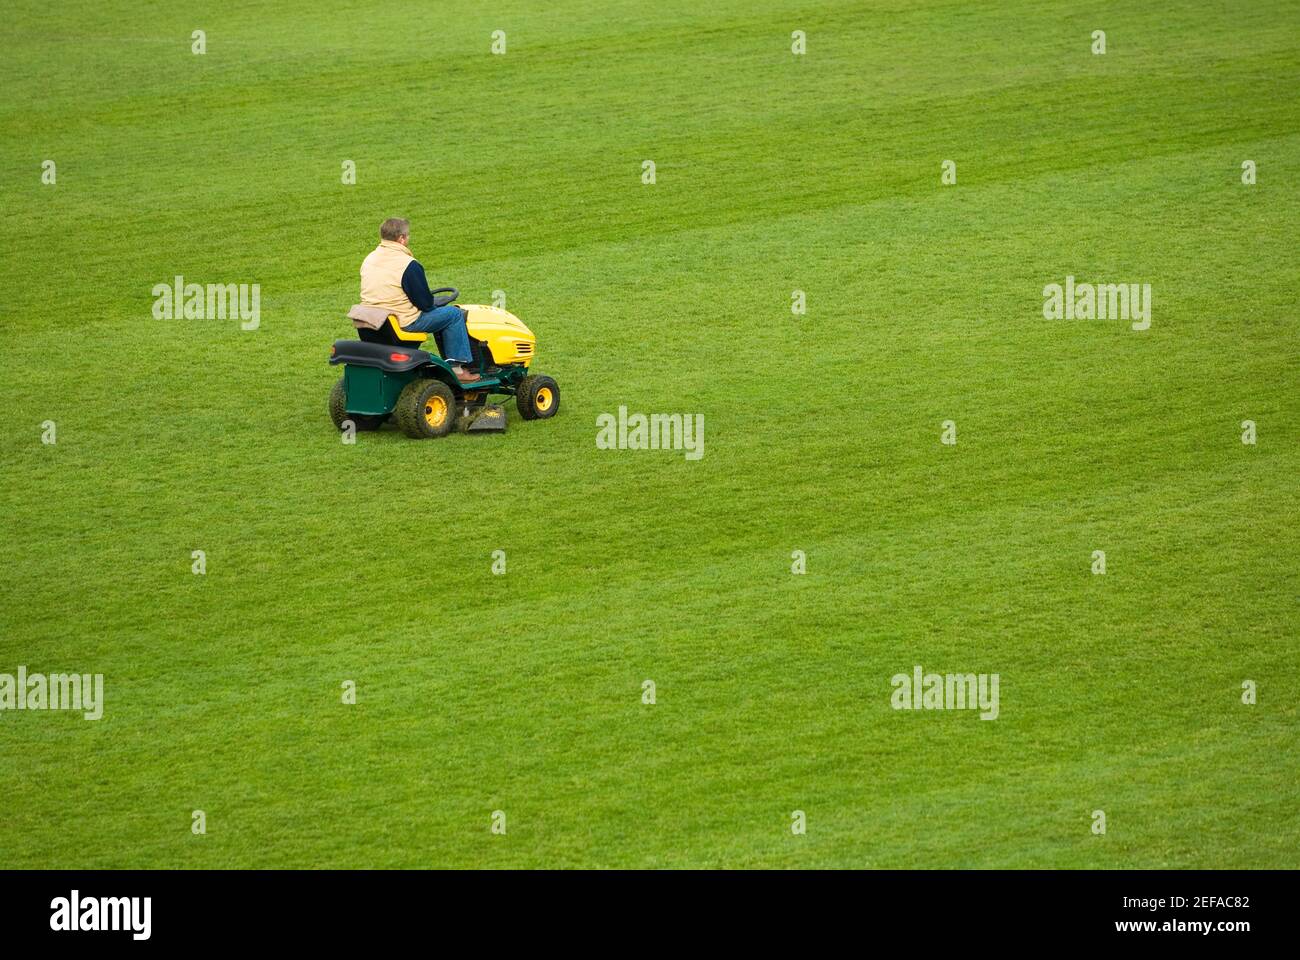 Side profile of a man mowing grass with a lawn mower in a field Stock Photo